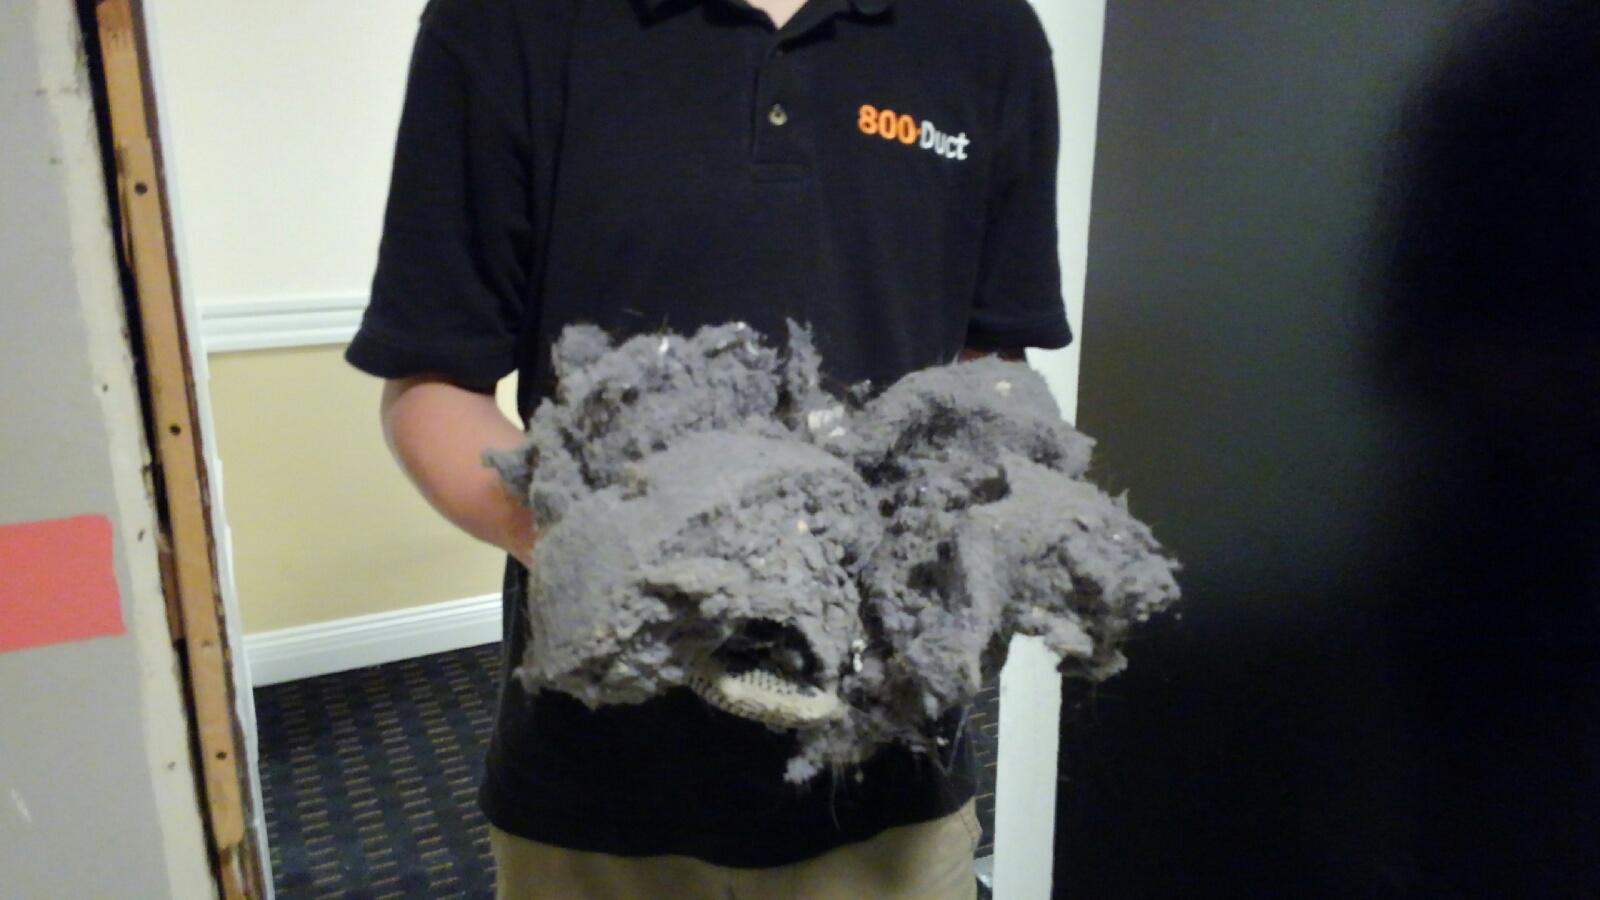 Get dryer vents professionally cleaned